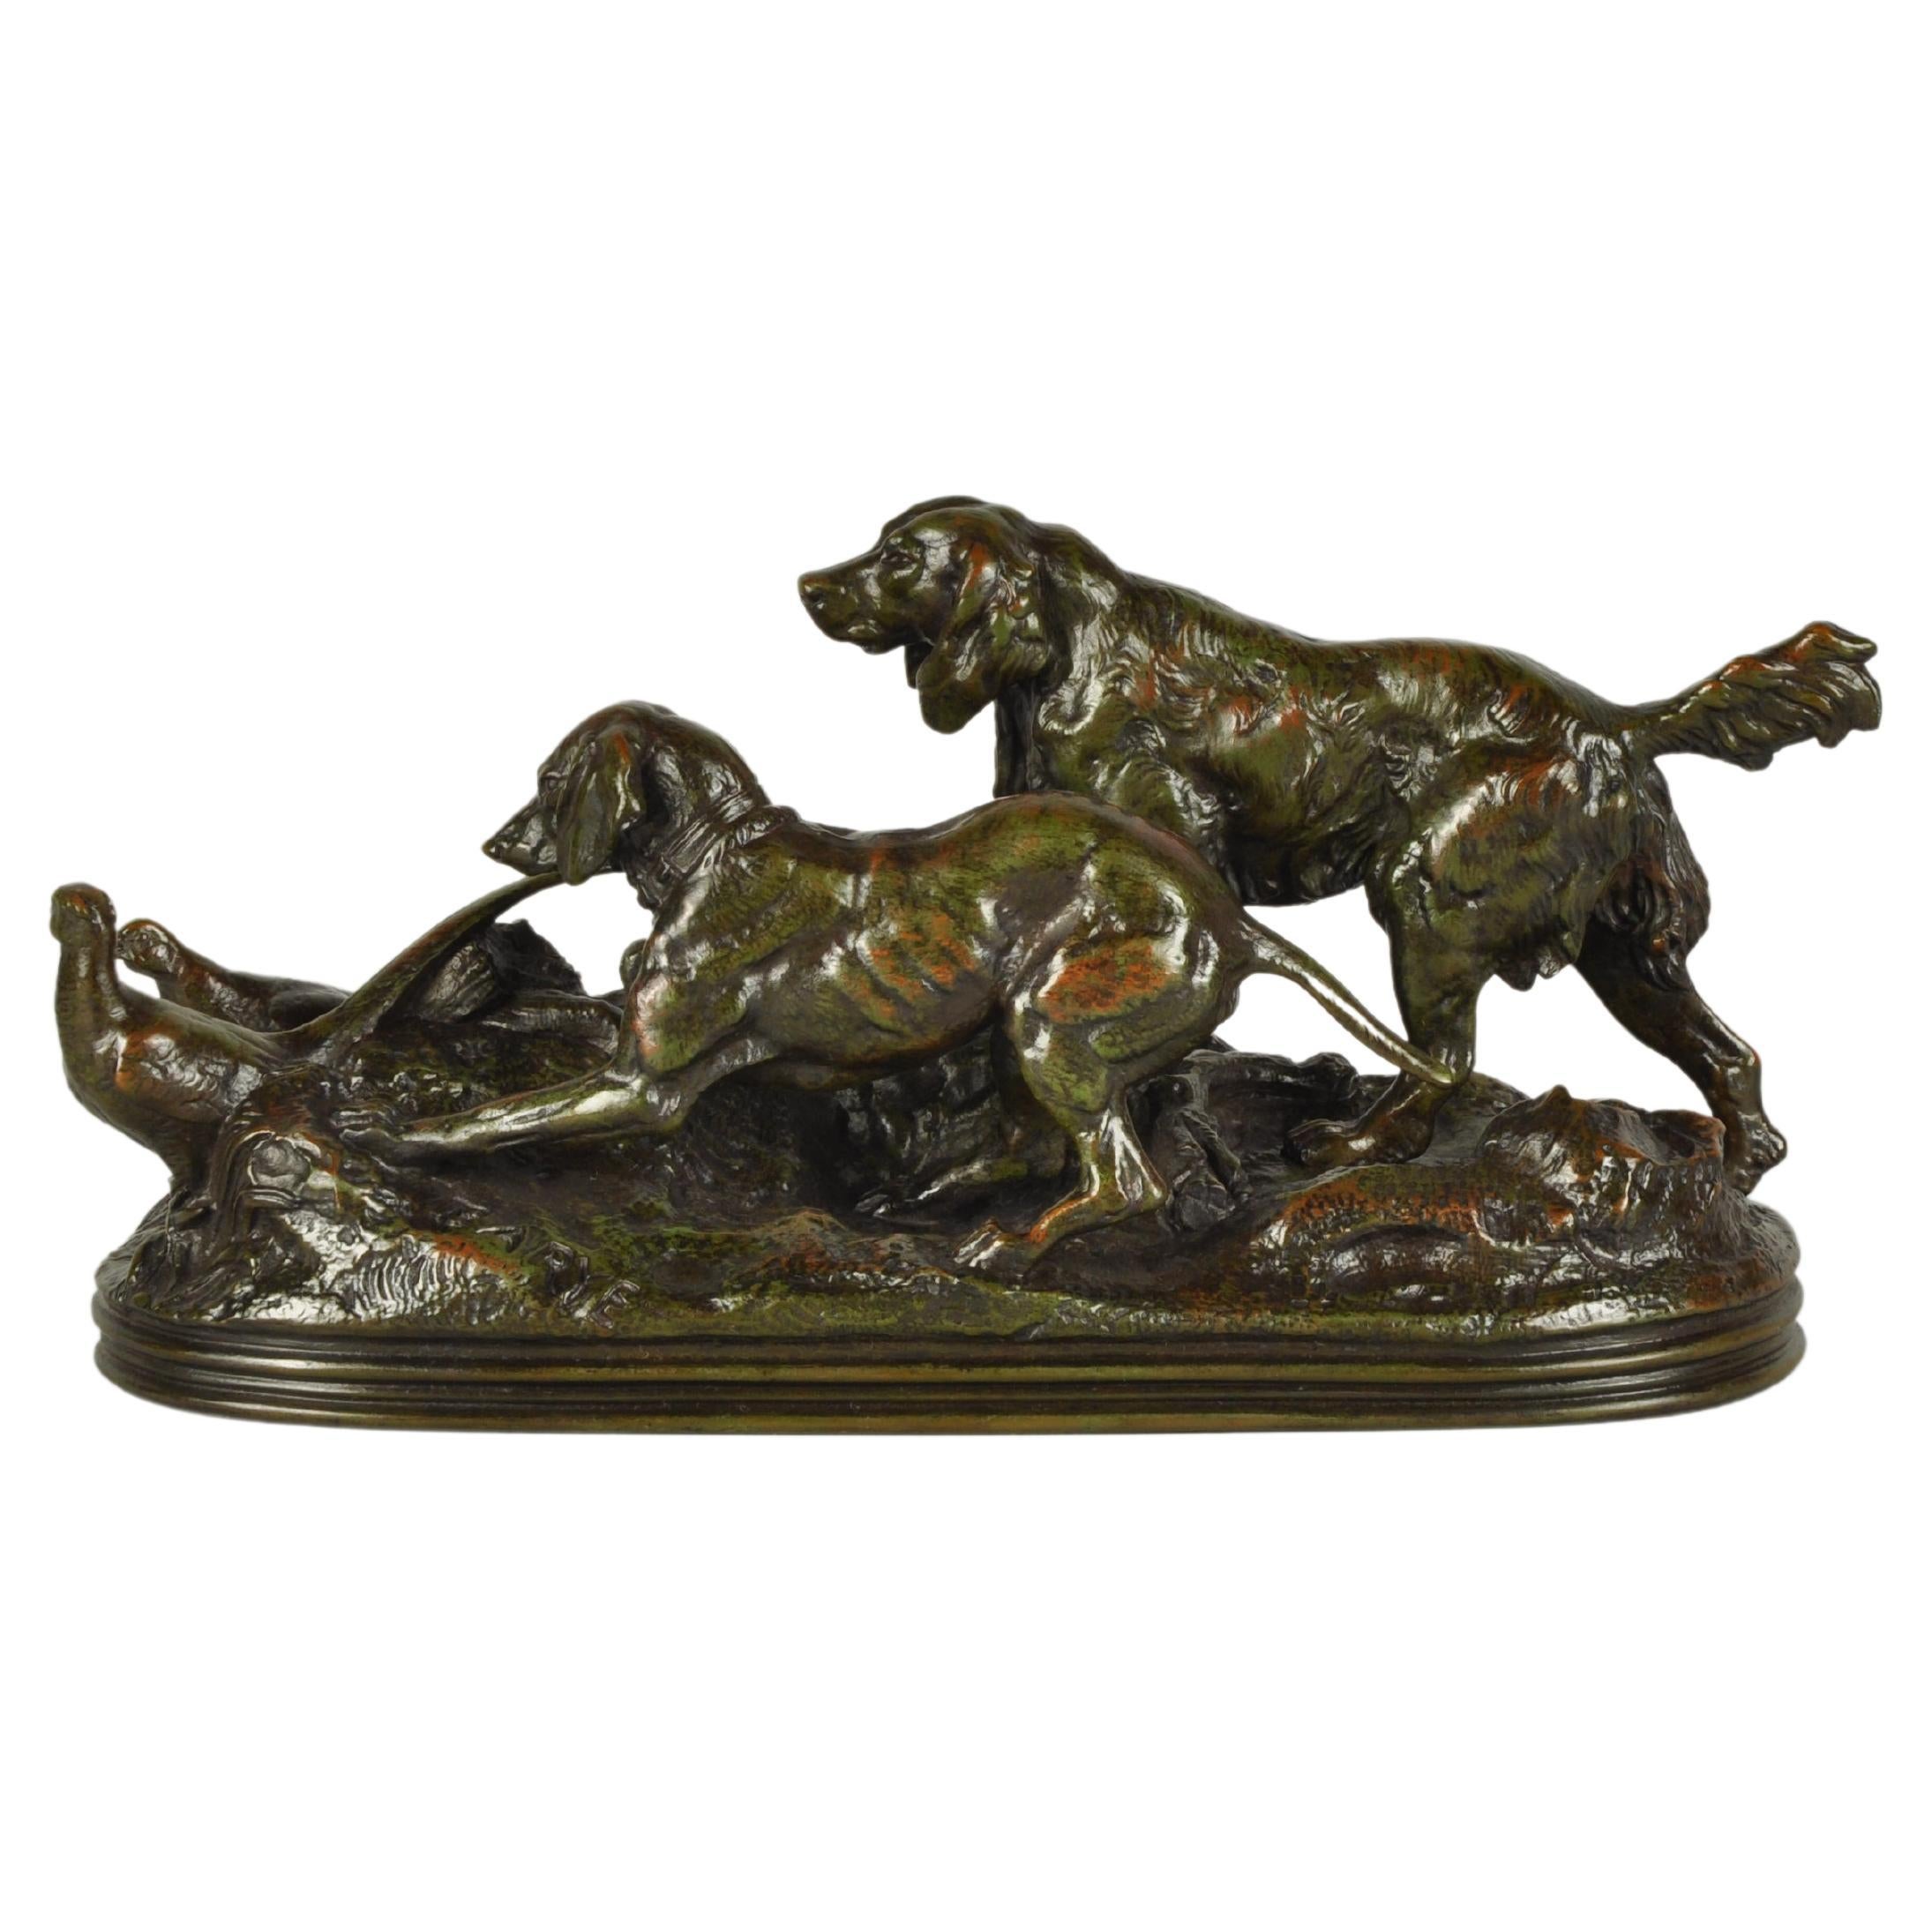 Mid-19th Century French Bronze Entitled "Deux Chiens en Arret" by A L Barye For Sale